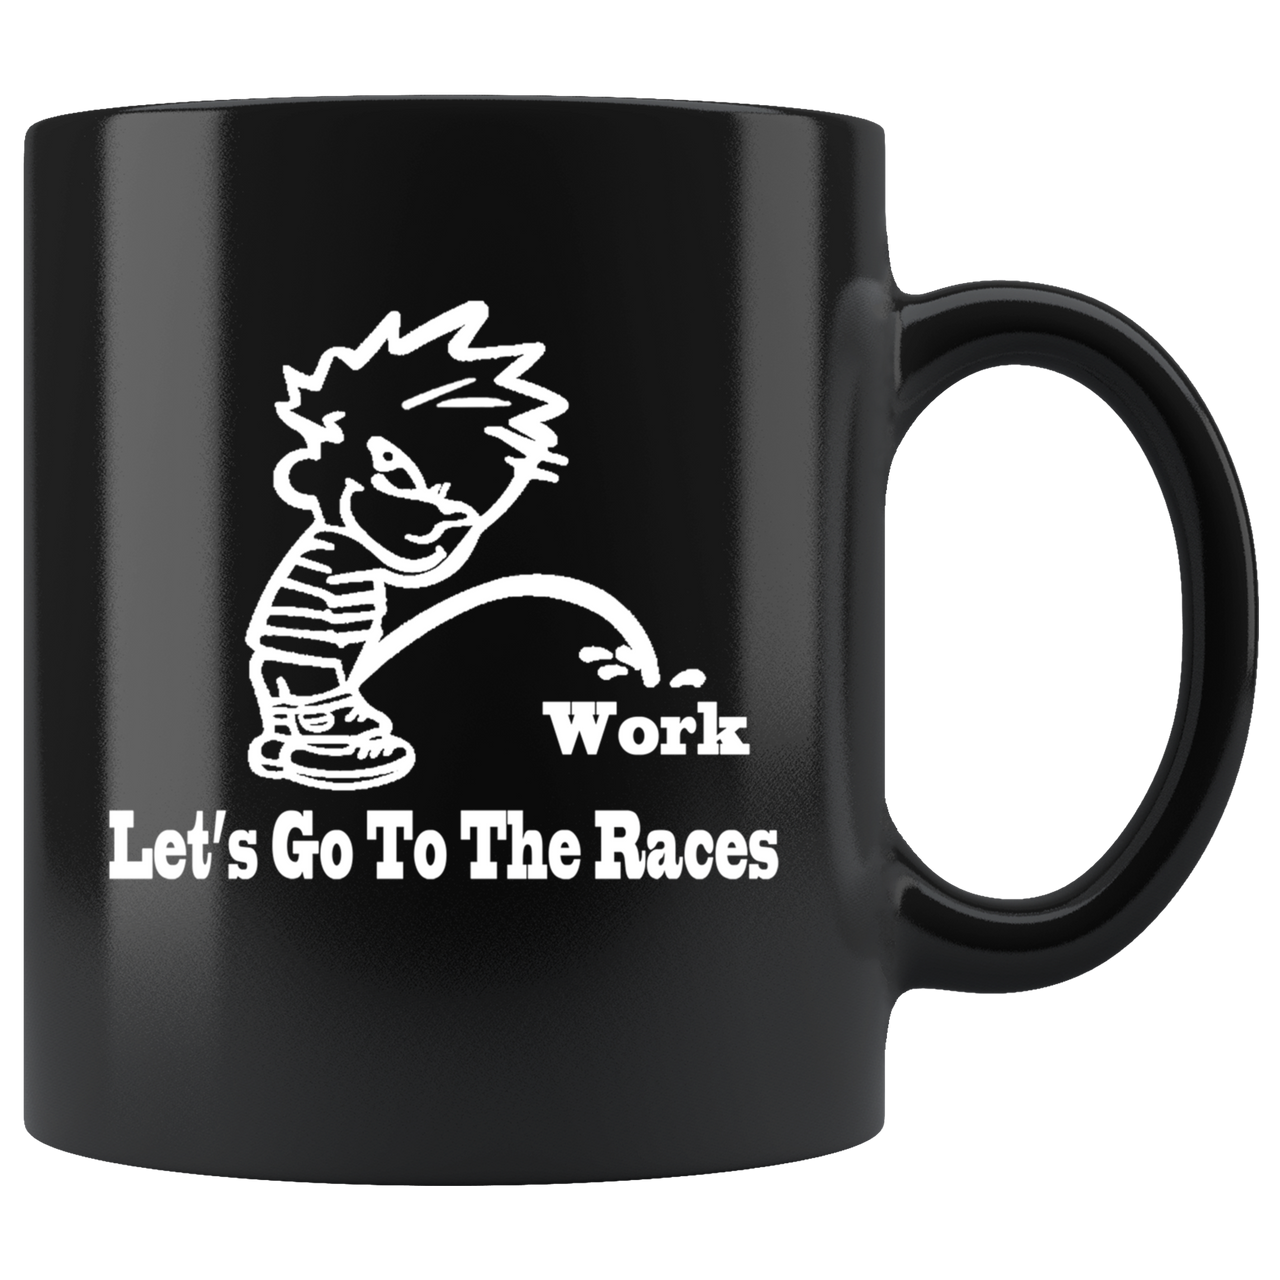 Let's go To The Races Mug!